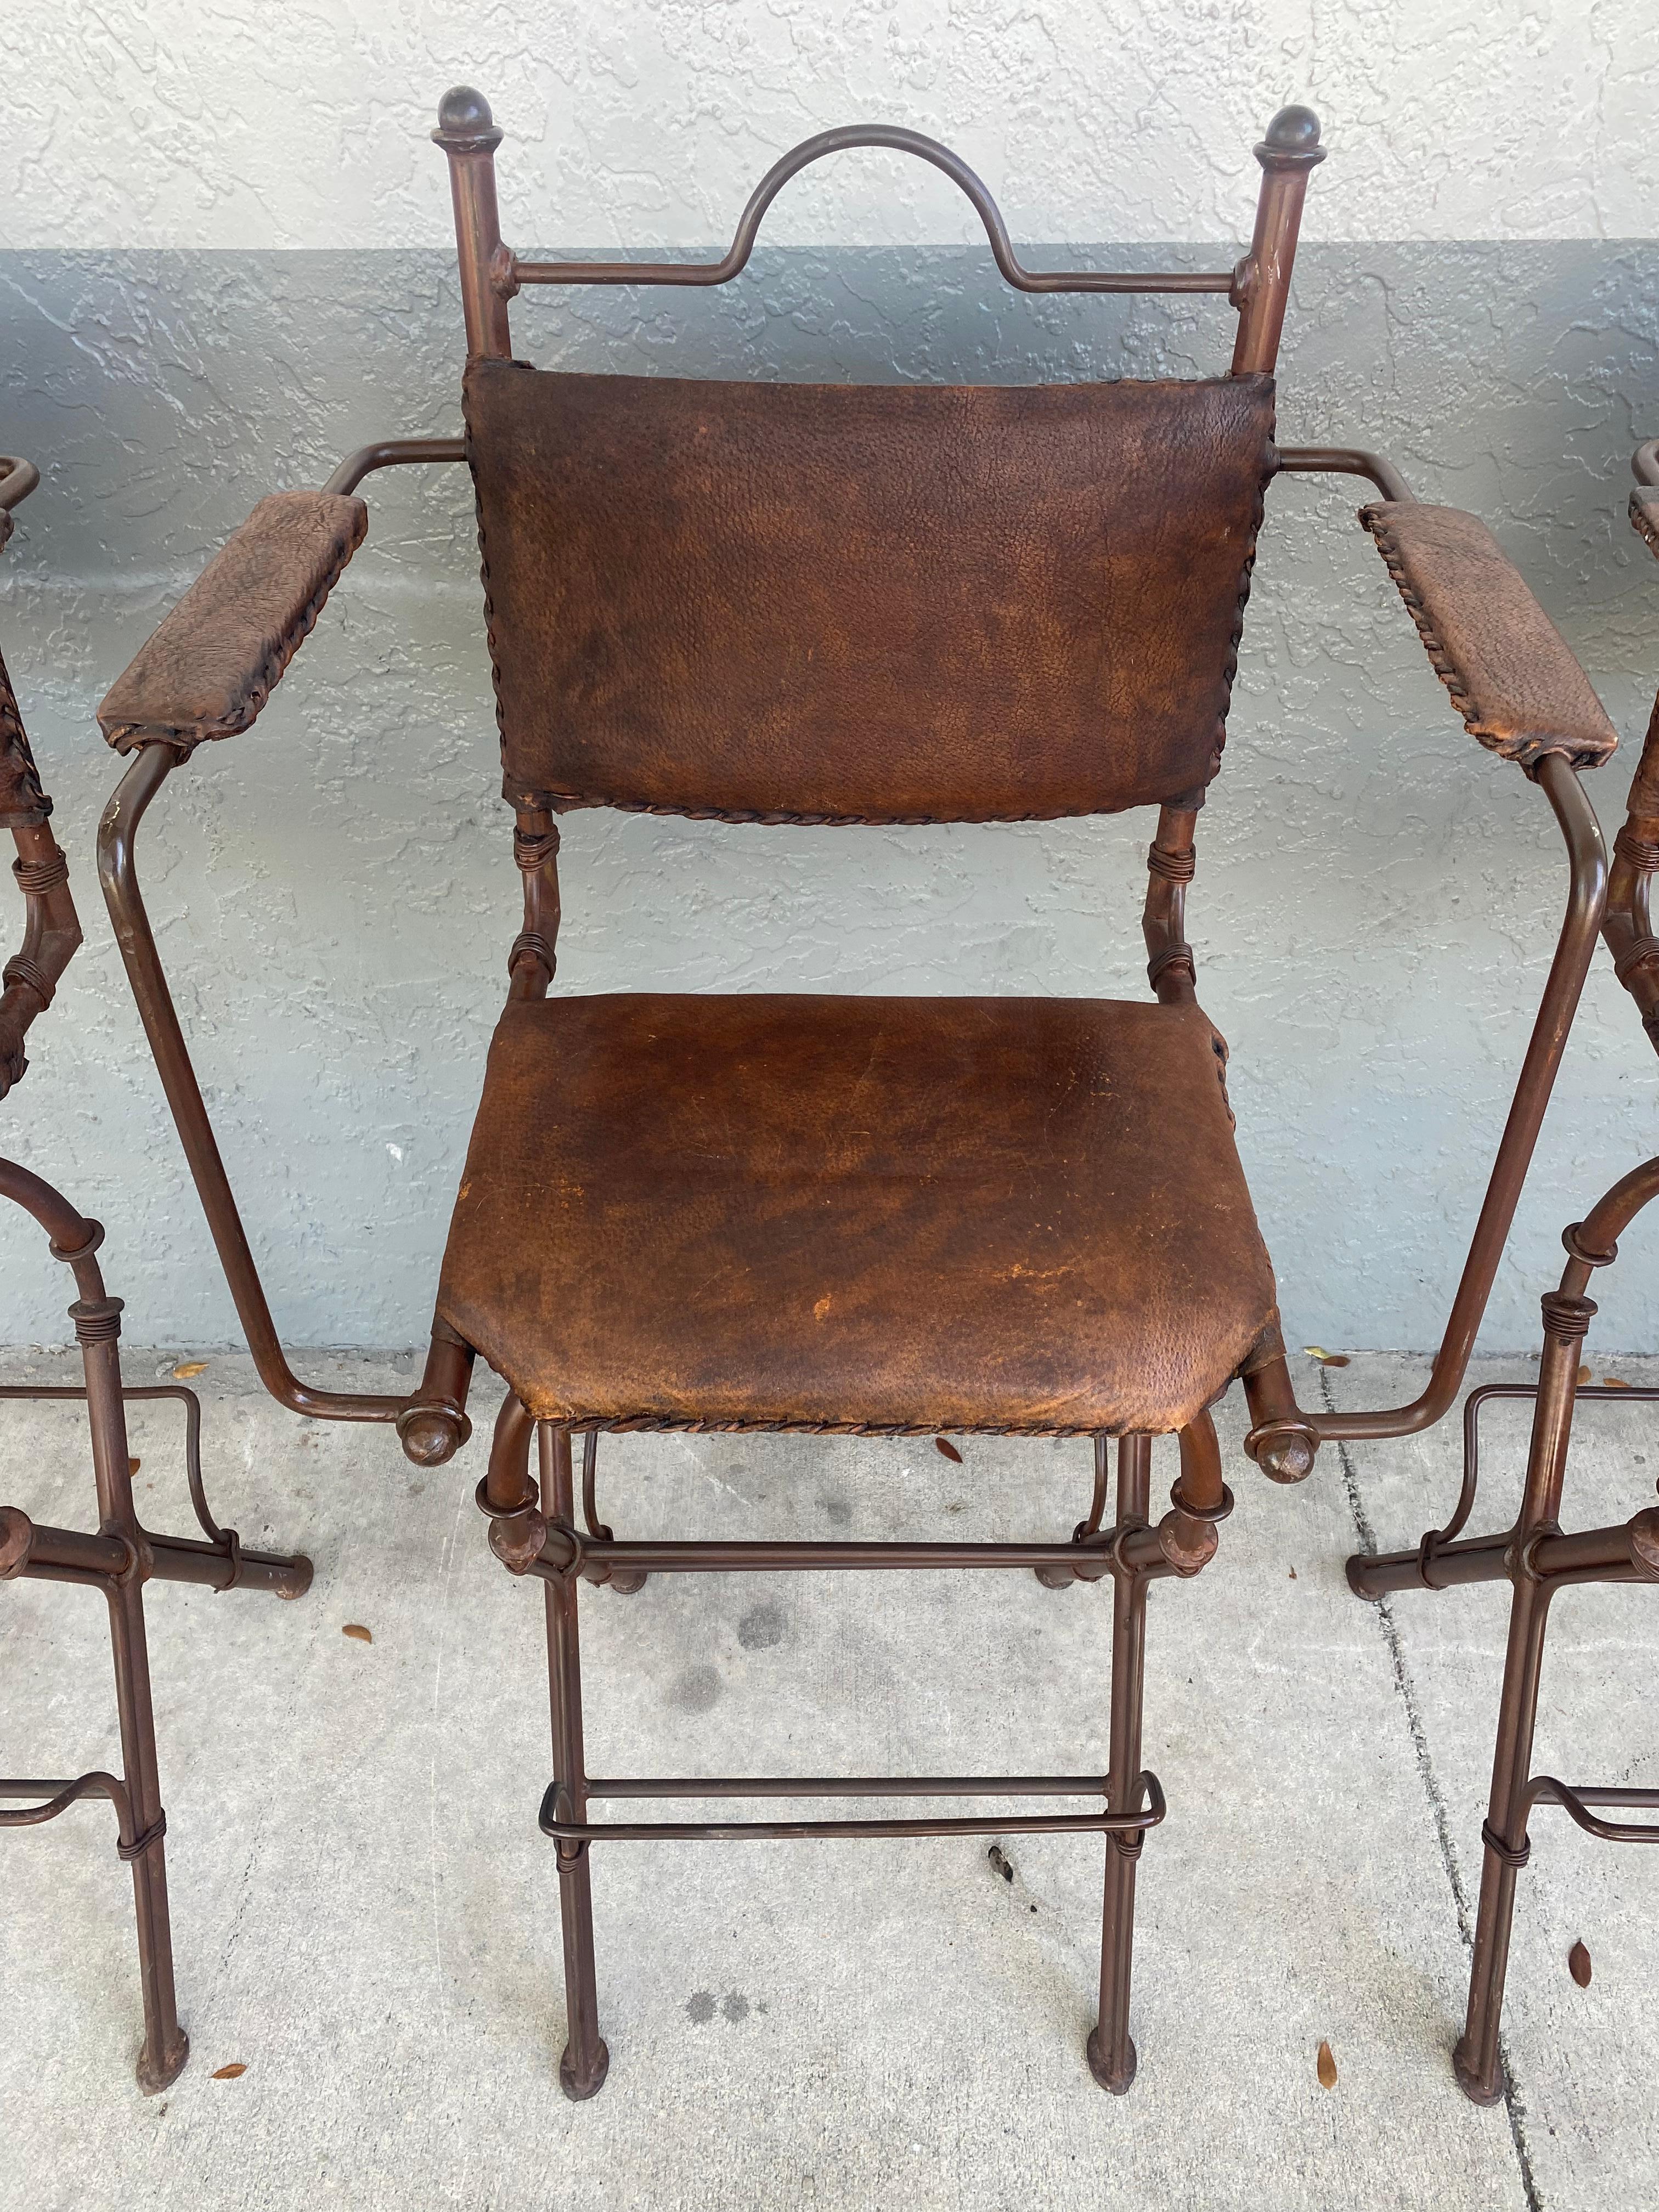 1940s Rustic Industrial Iron and Buffalo Leather Swivel Stools, Set of 4 For Sale 9